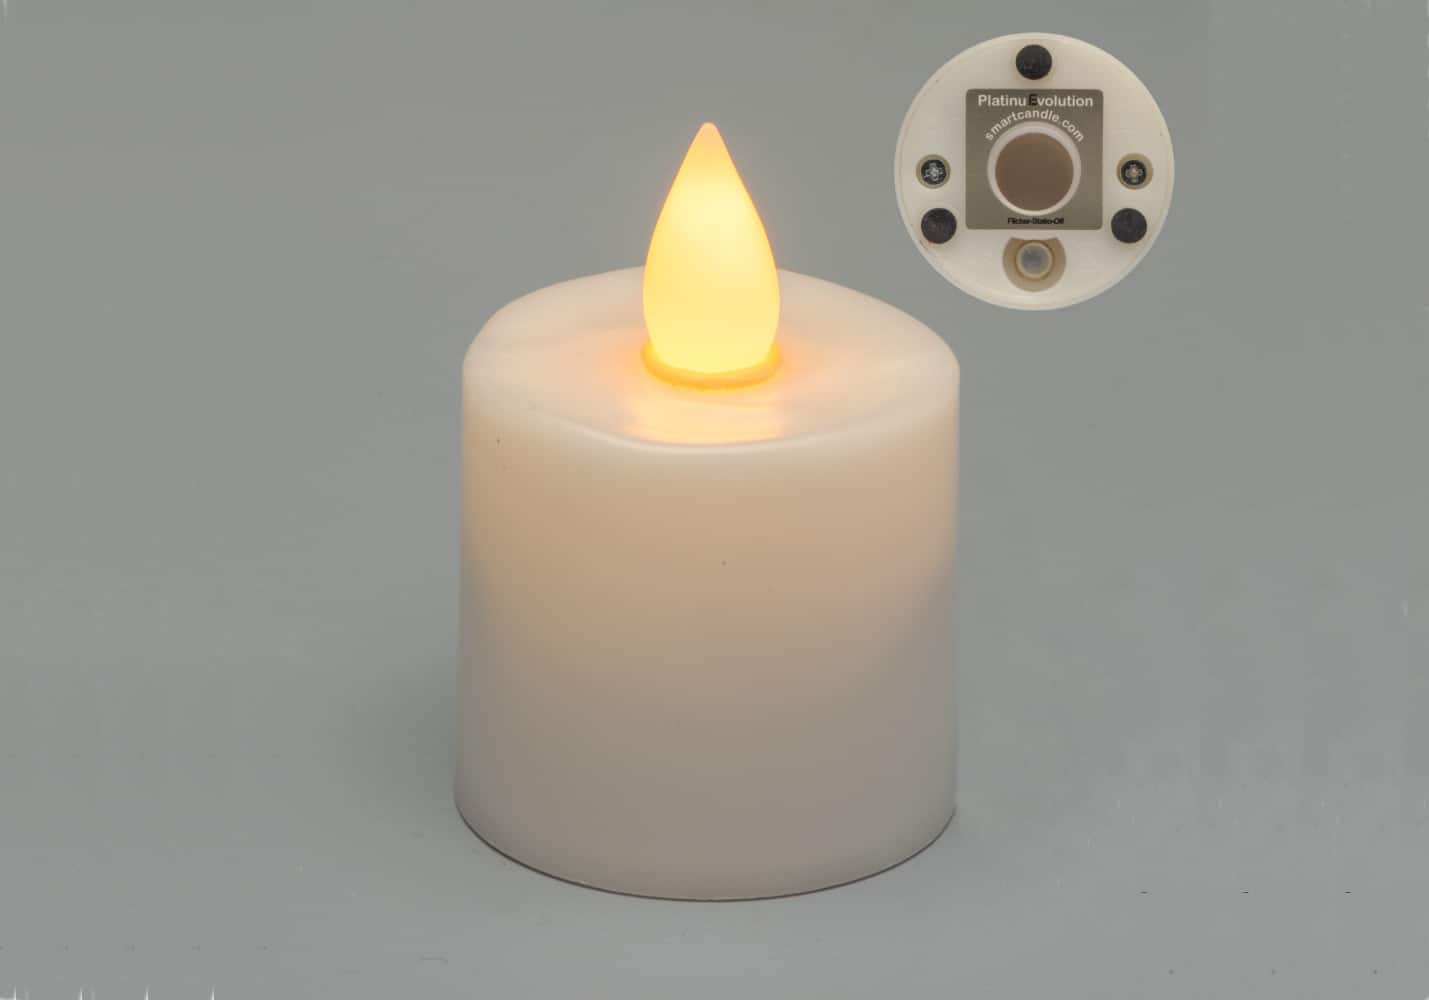 Evolution Candle Light Rechargeable Candle SC2117CL